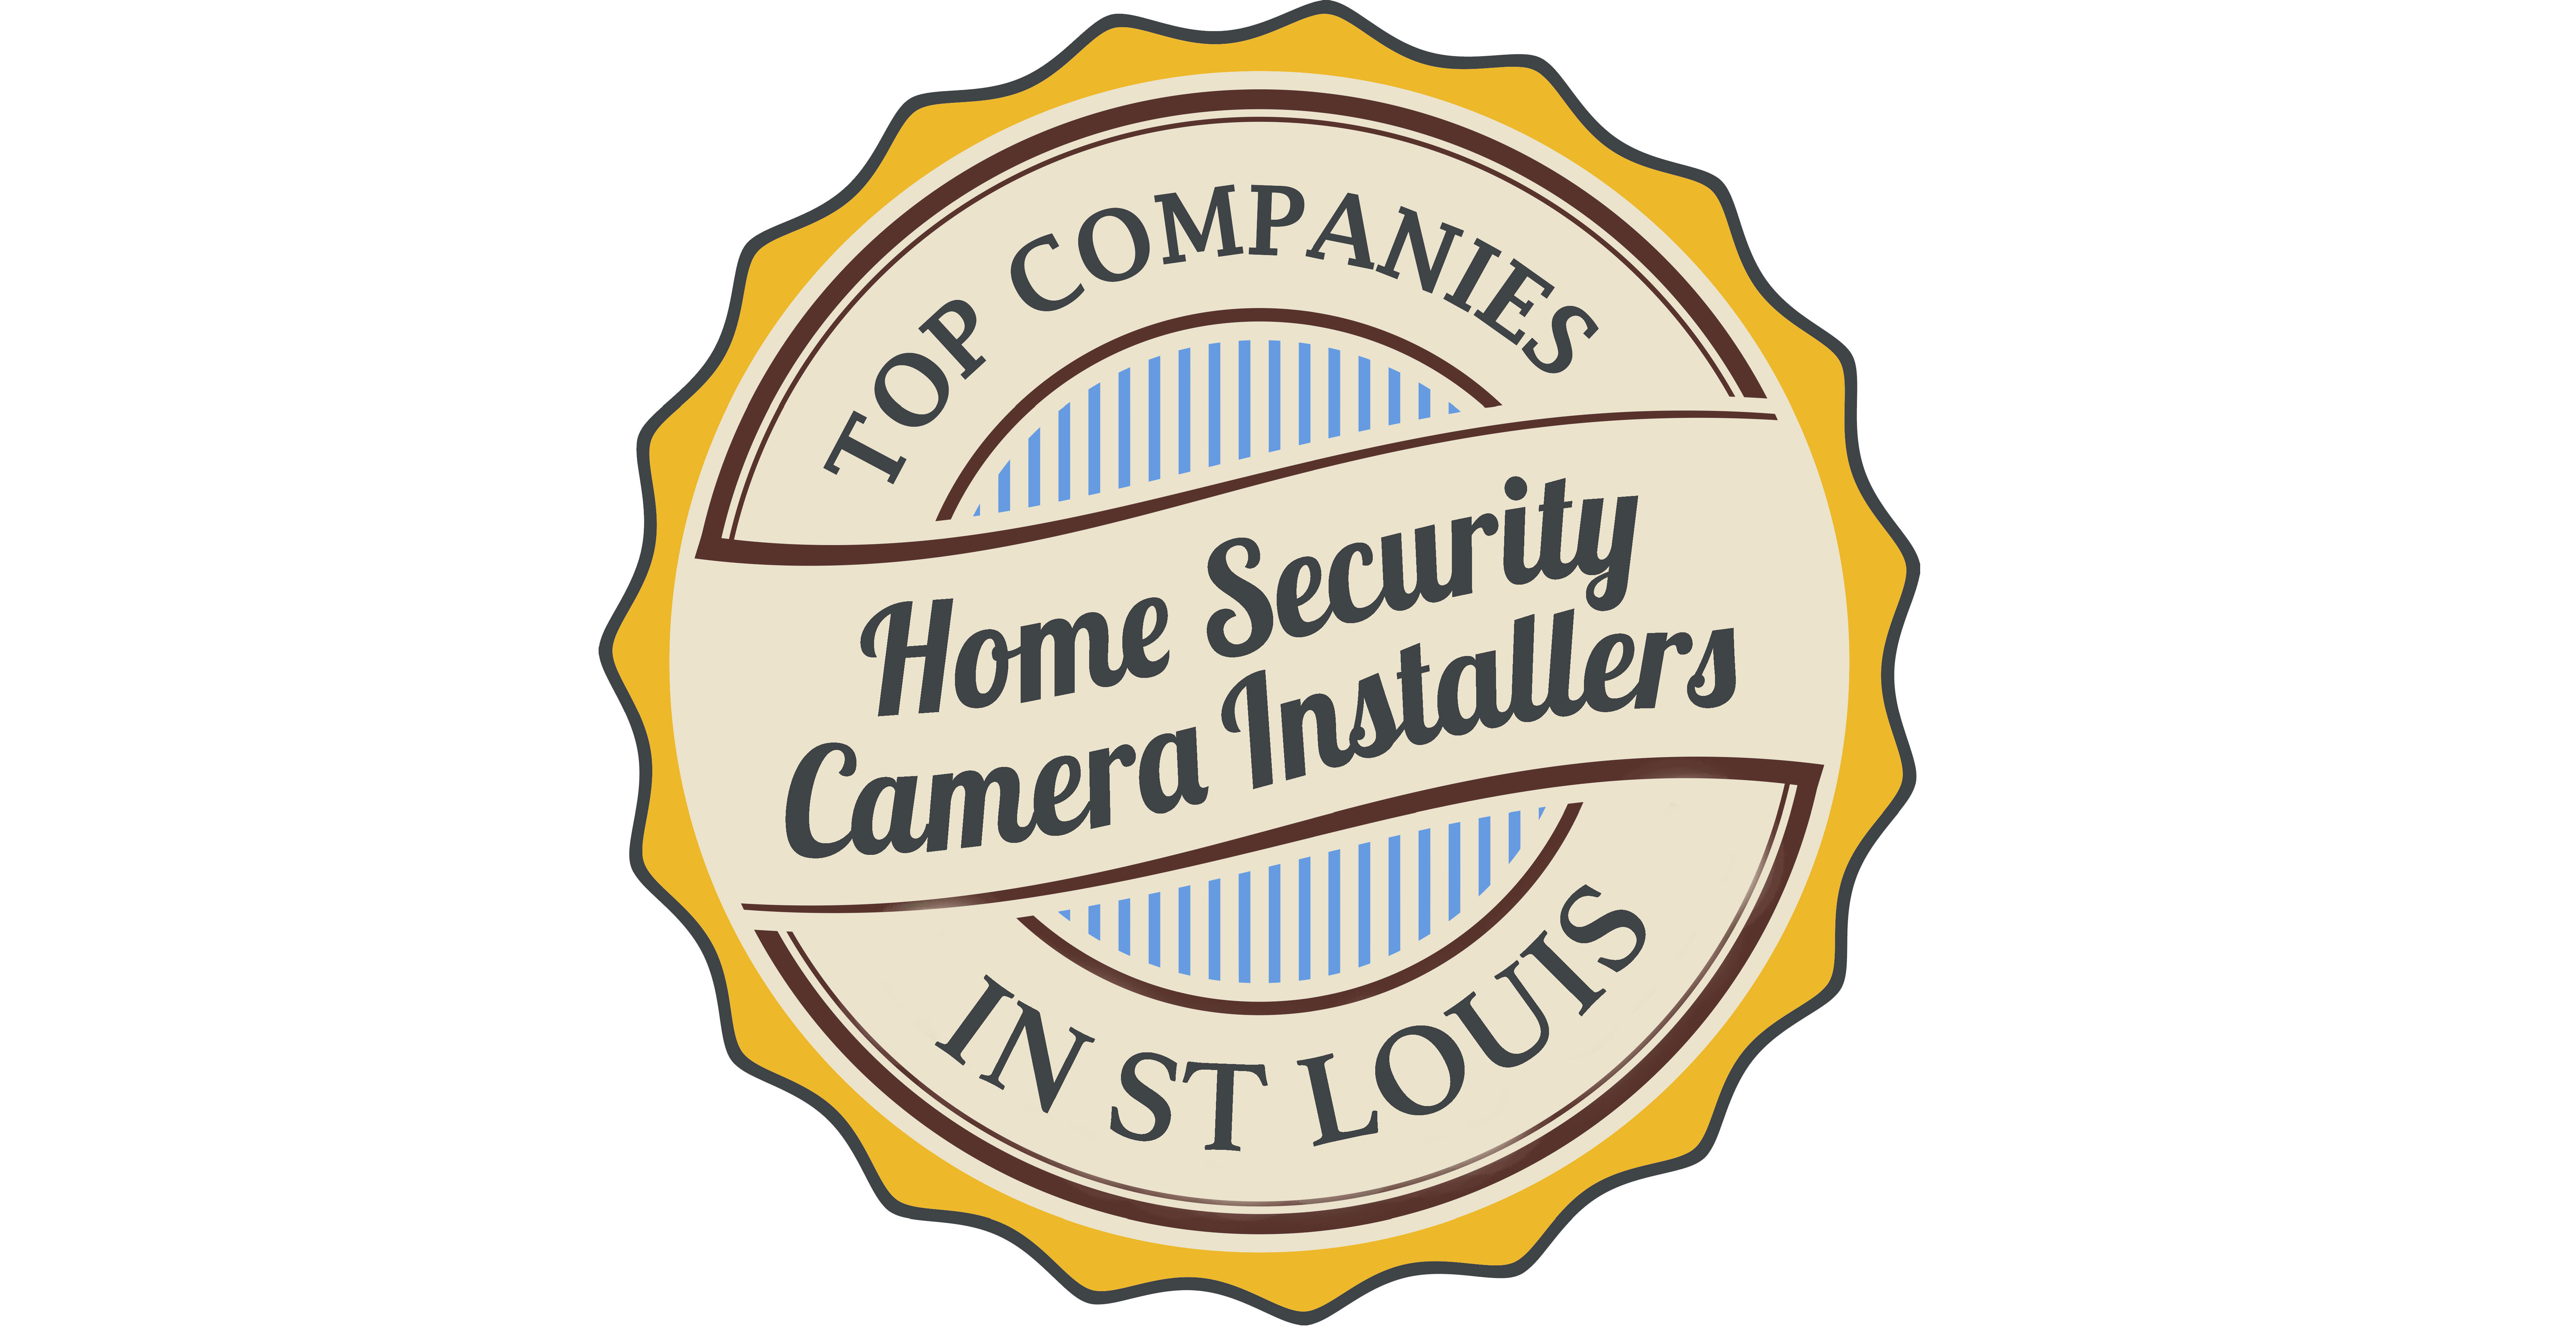 Top 10 St. Louis Home Security Camera Installers